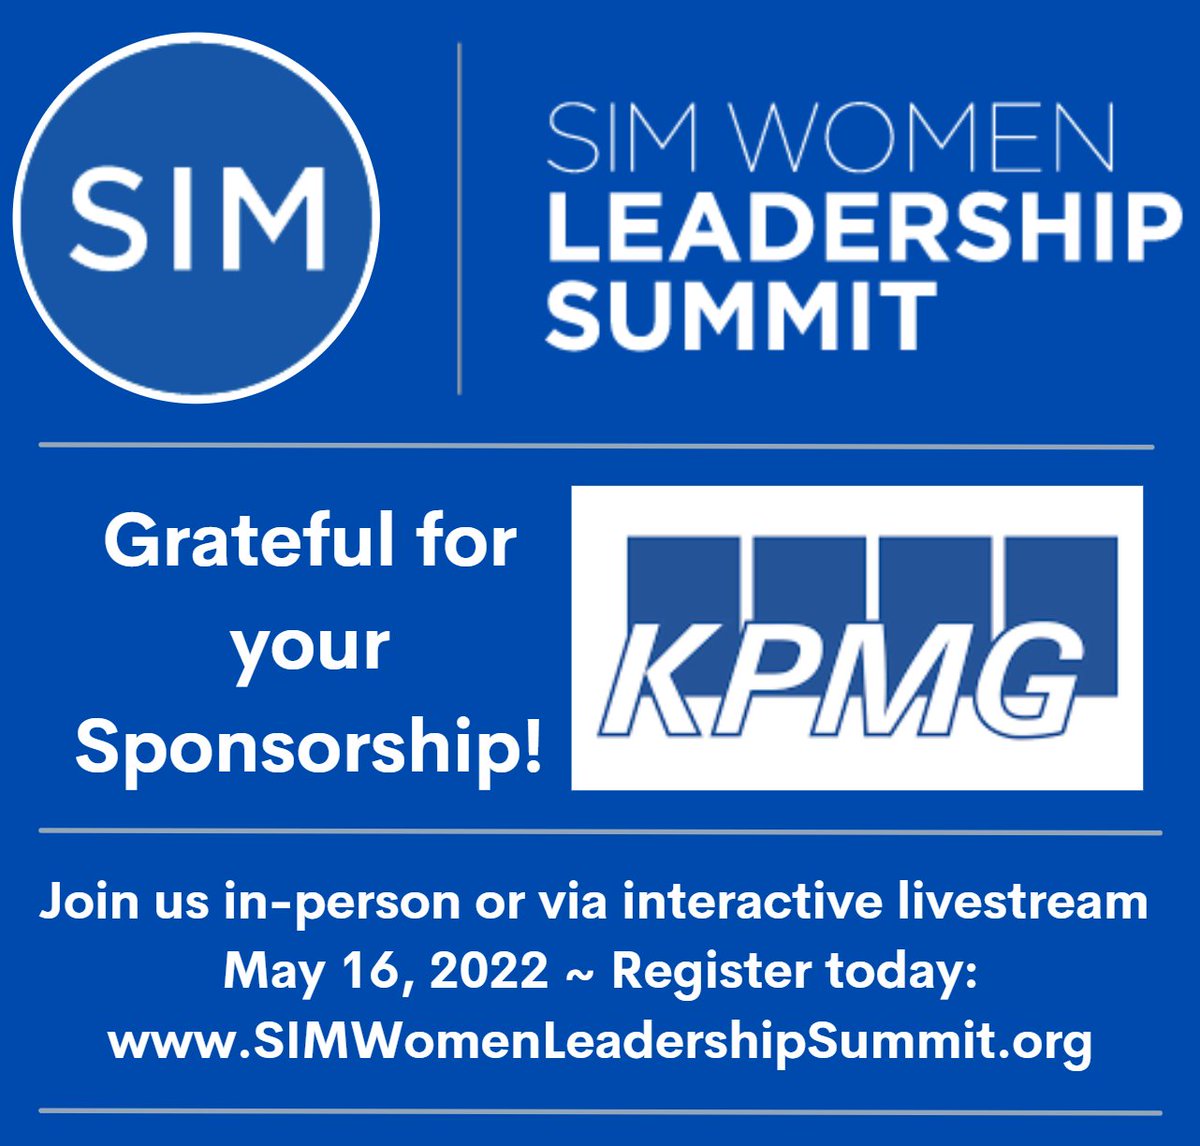 Delighted to have the Information Technology leaders and professionals from @KPMG joining us at the #SIMWomenLeadershipSummit!

Register: bit.ly/SIMWomenReg

#womenintech #DEI #diversity #leadership